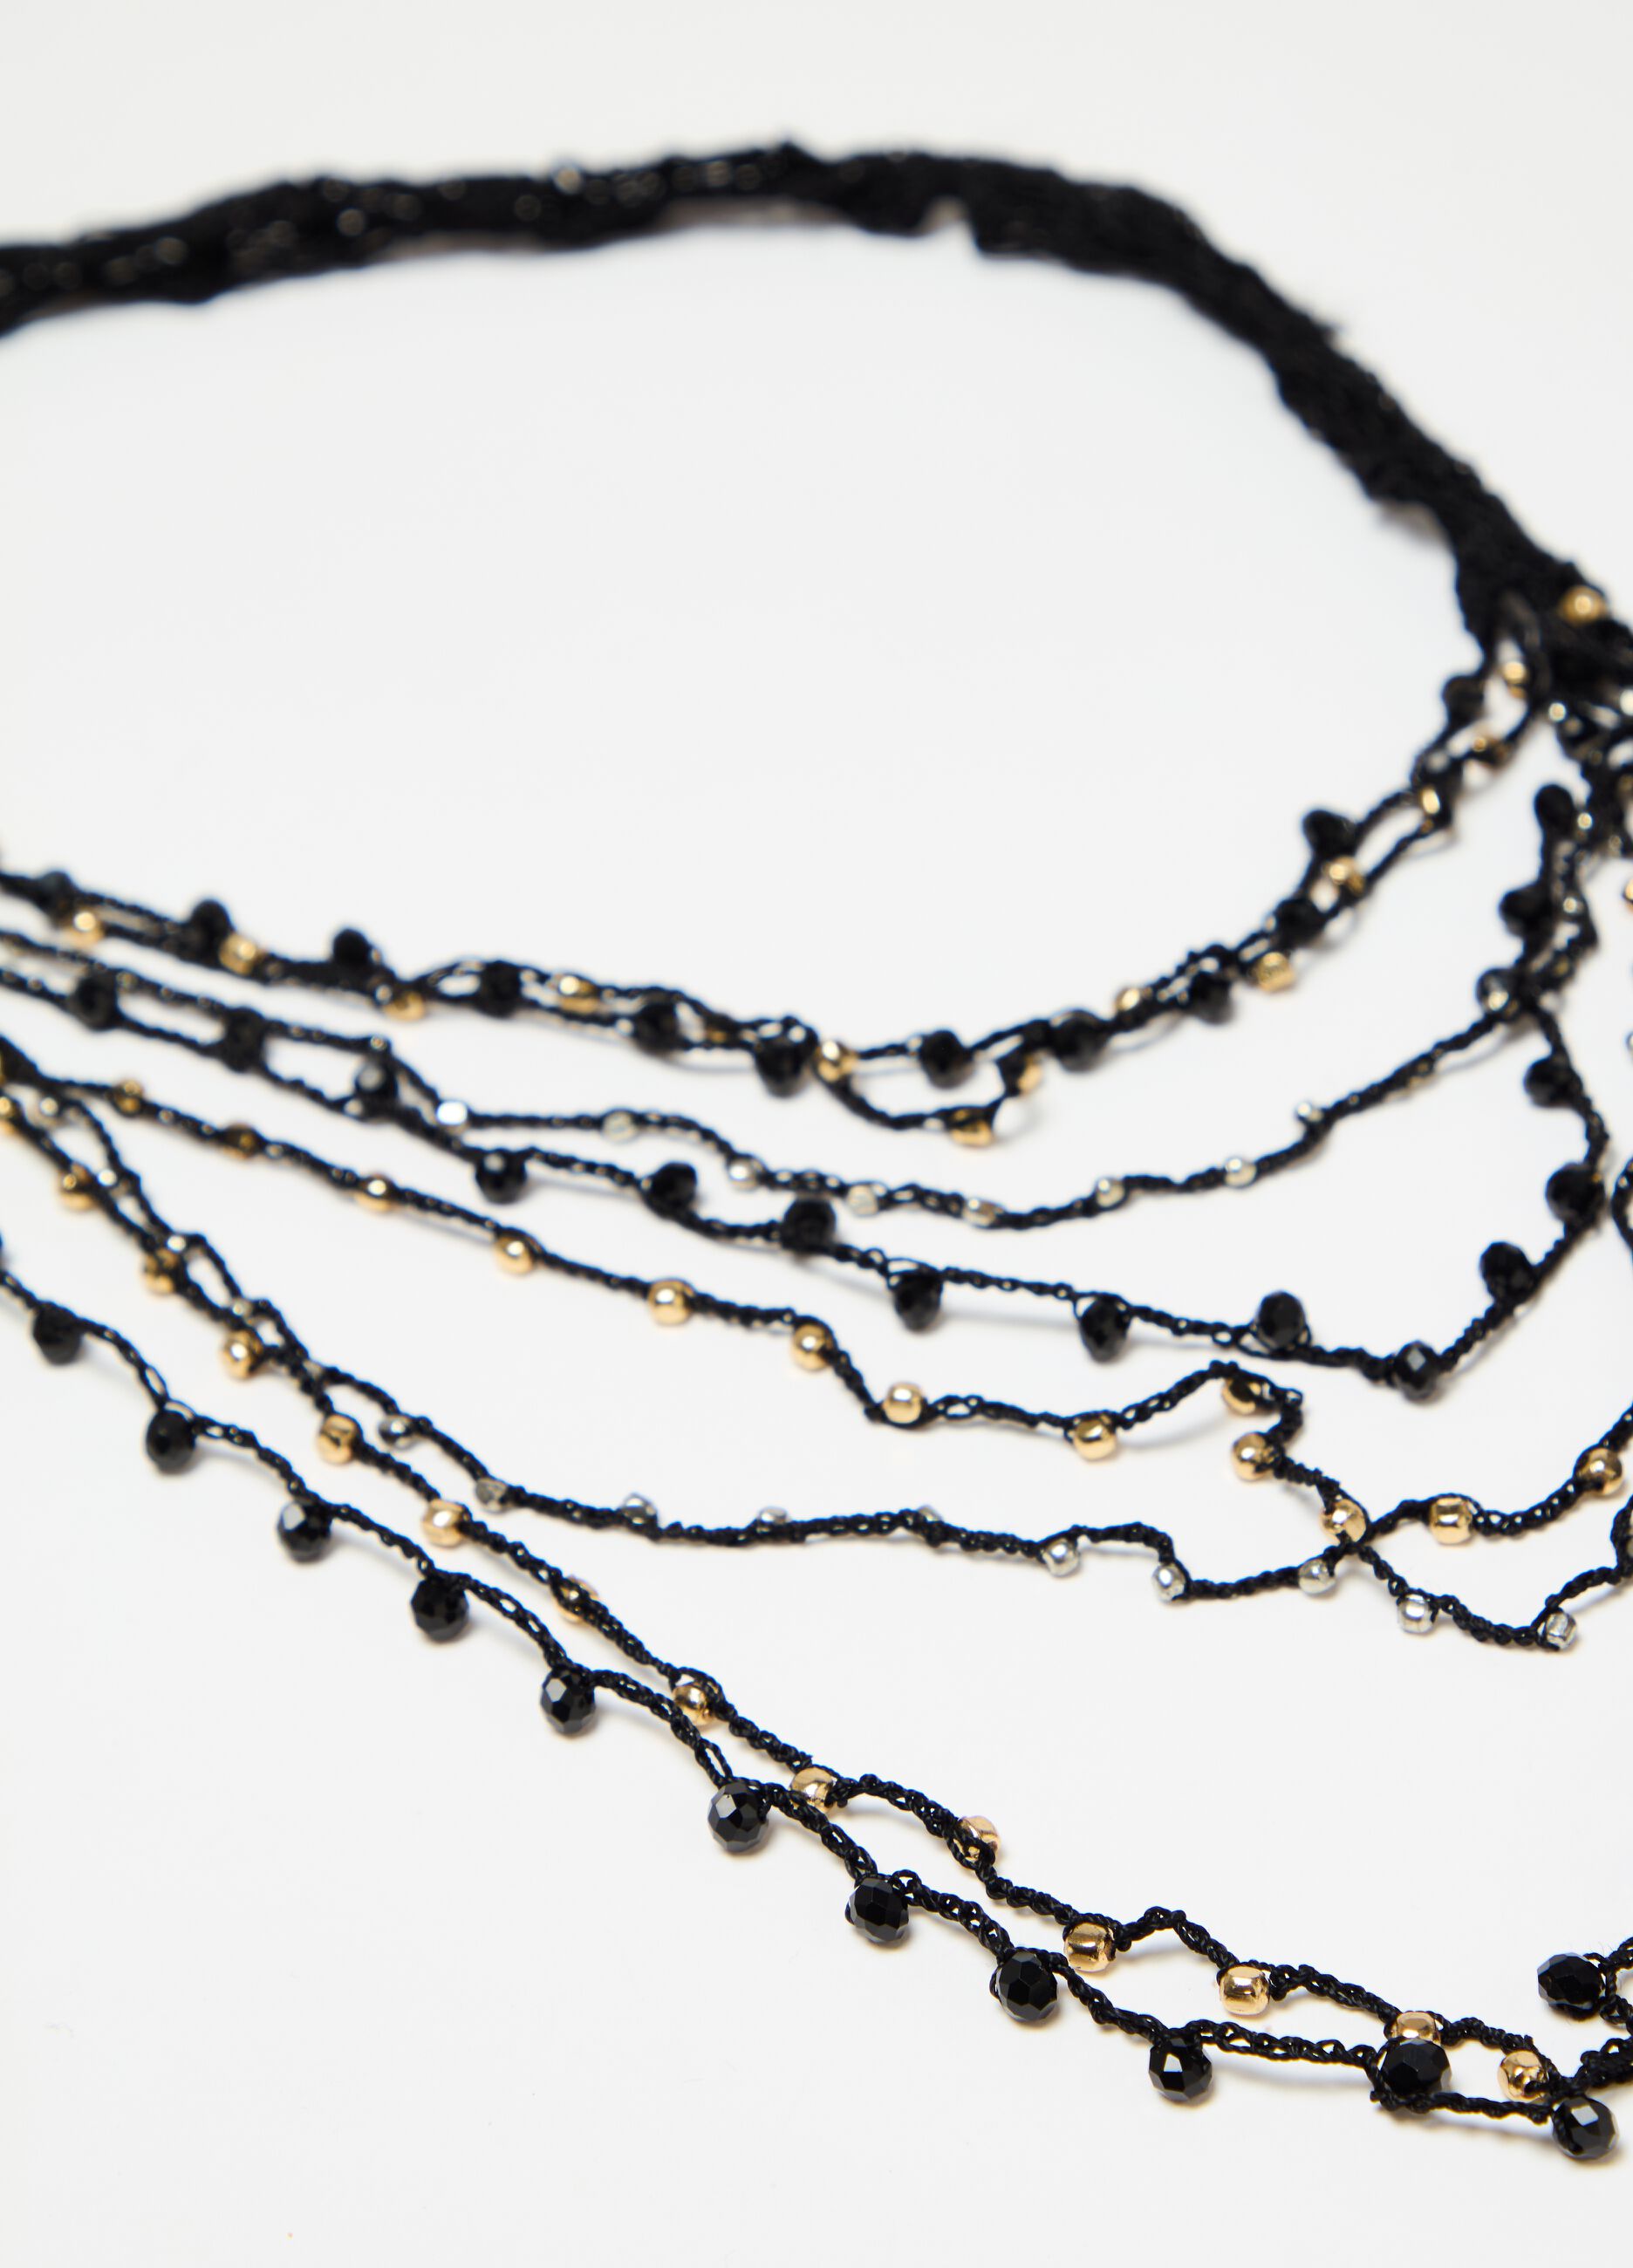 Long necklace with multi-string mesh